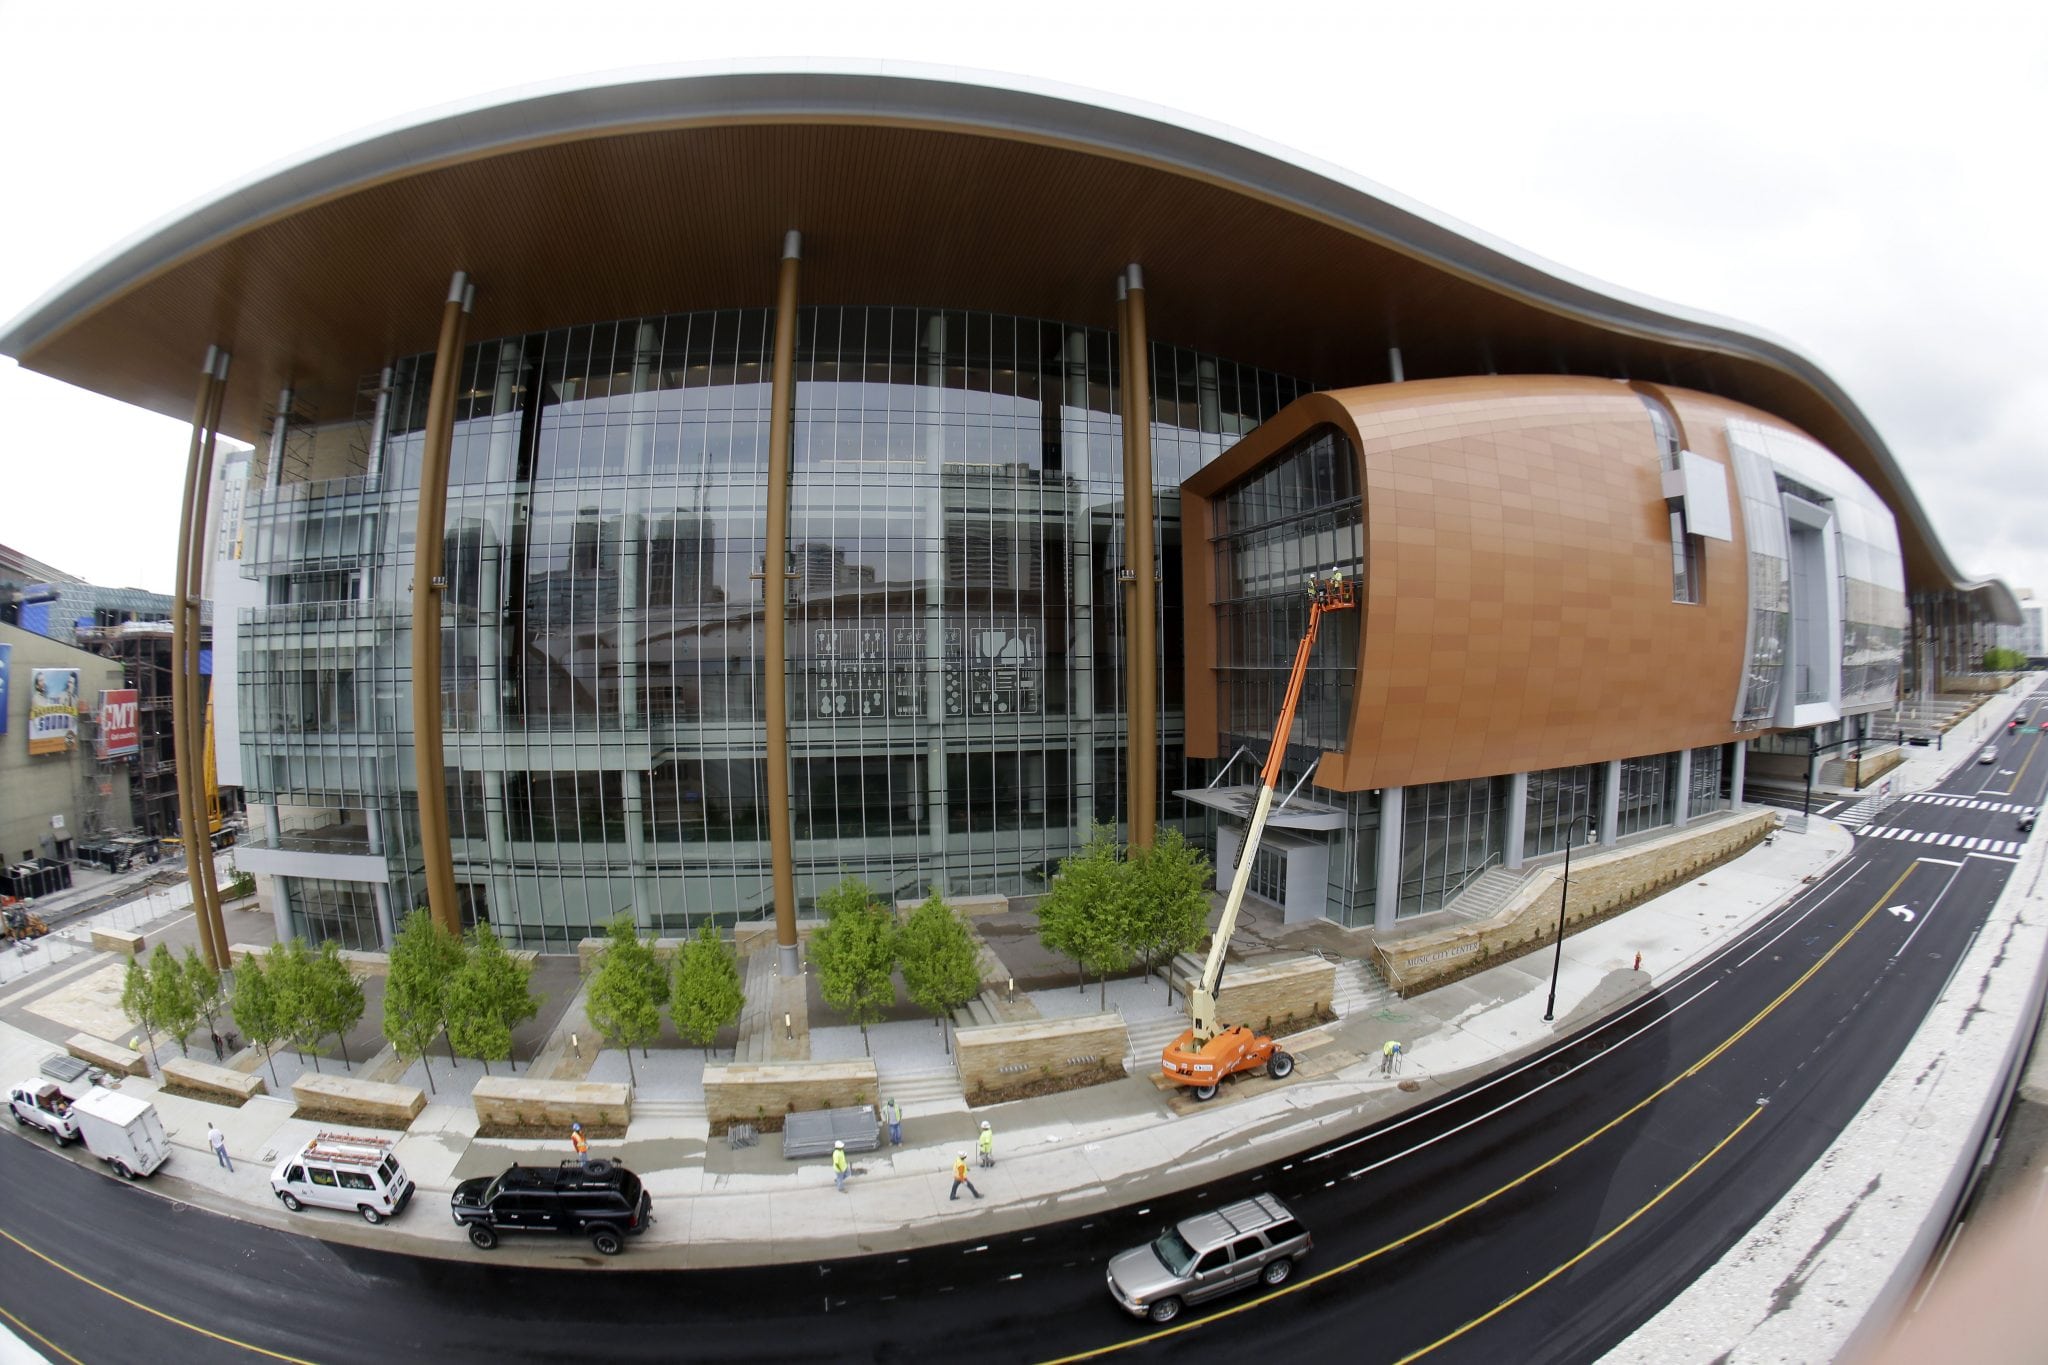 This April 29, 2013, photo made with a fisheye lens shows the Music City Center in Nashville, Tenn. Nashville's new convention center is transforming the look of downtown with its wavy roof dominating six city blocks, but tourism officials hope the eye-catching facility will also show business travelers a revitalized Music City. 